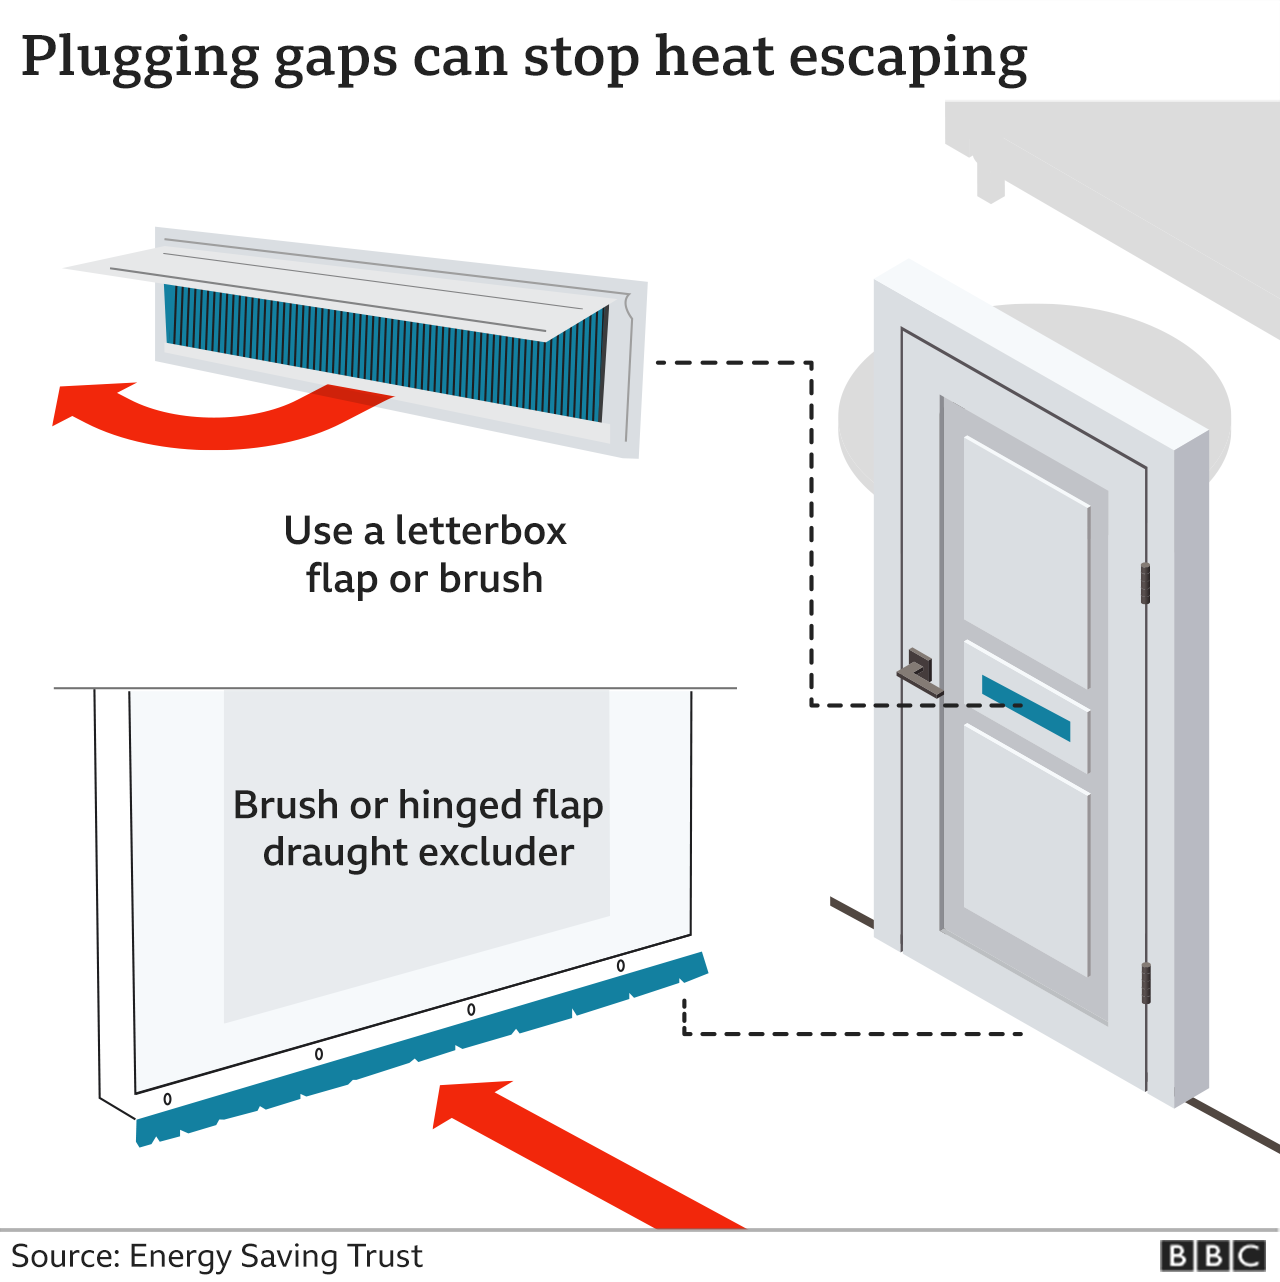 Graphic showing how plugging gaps can help